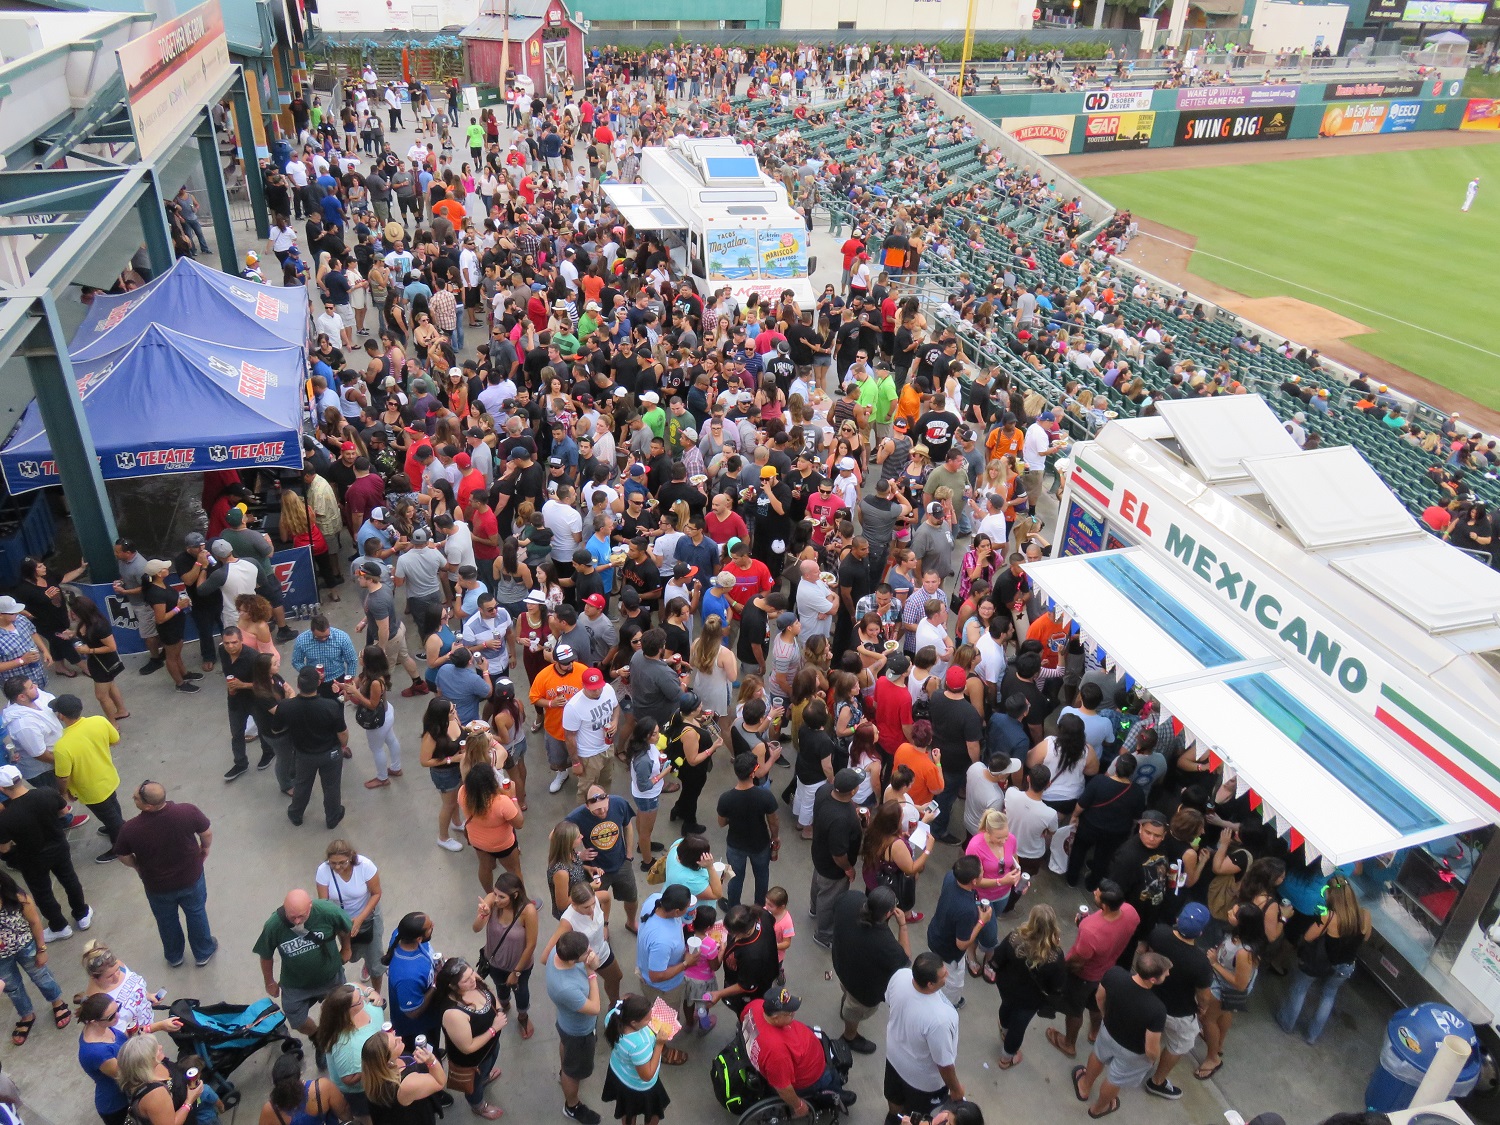 The concourses at Chukchansi Park in Fresno were so swamped that when the Taco Truck Throwdown expanded, trucks had to be moved to other places. (Fresno Grizzlies/Kiel Maddox)